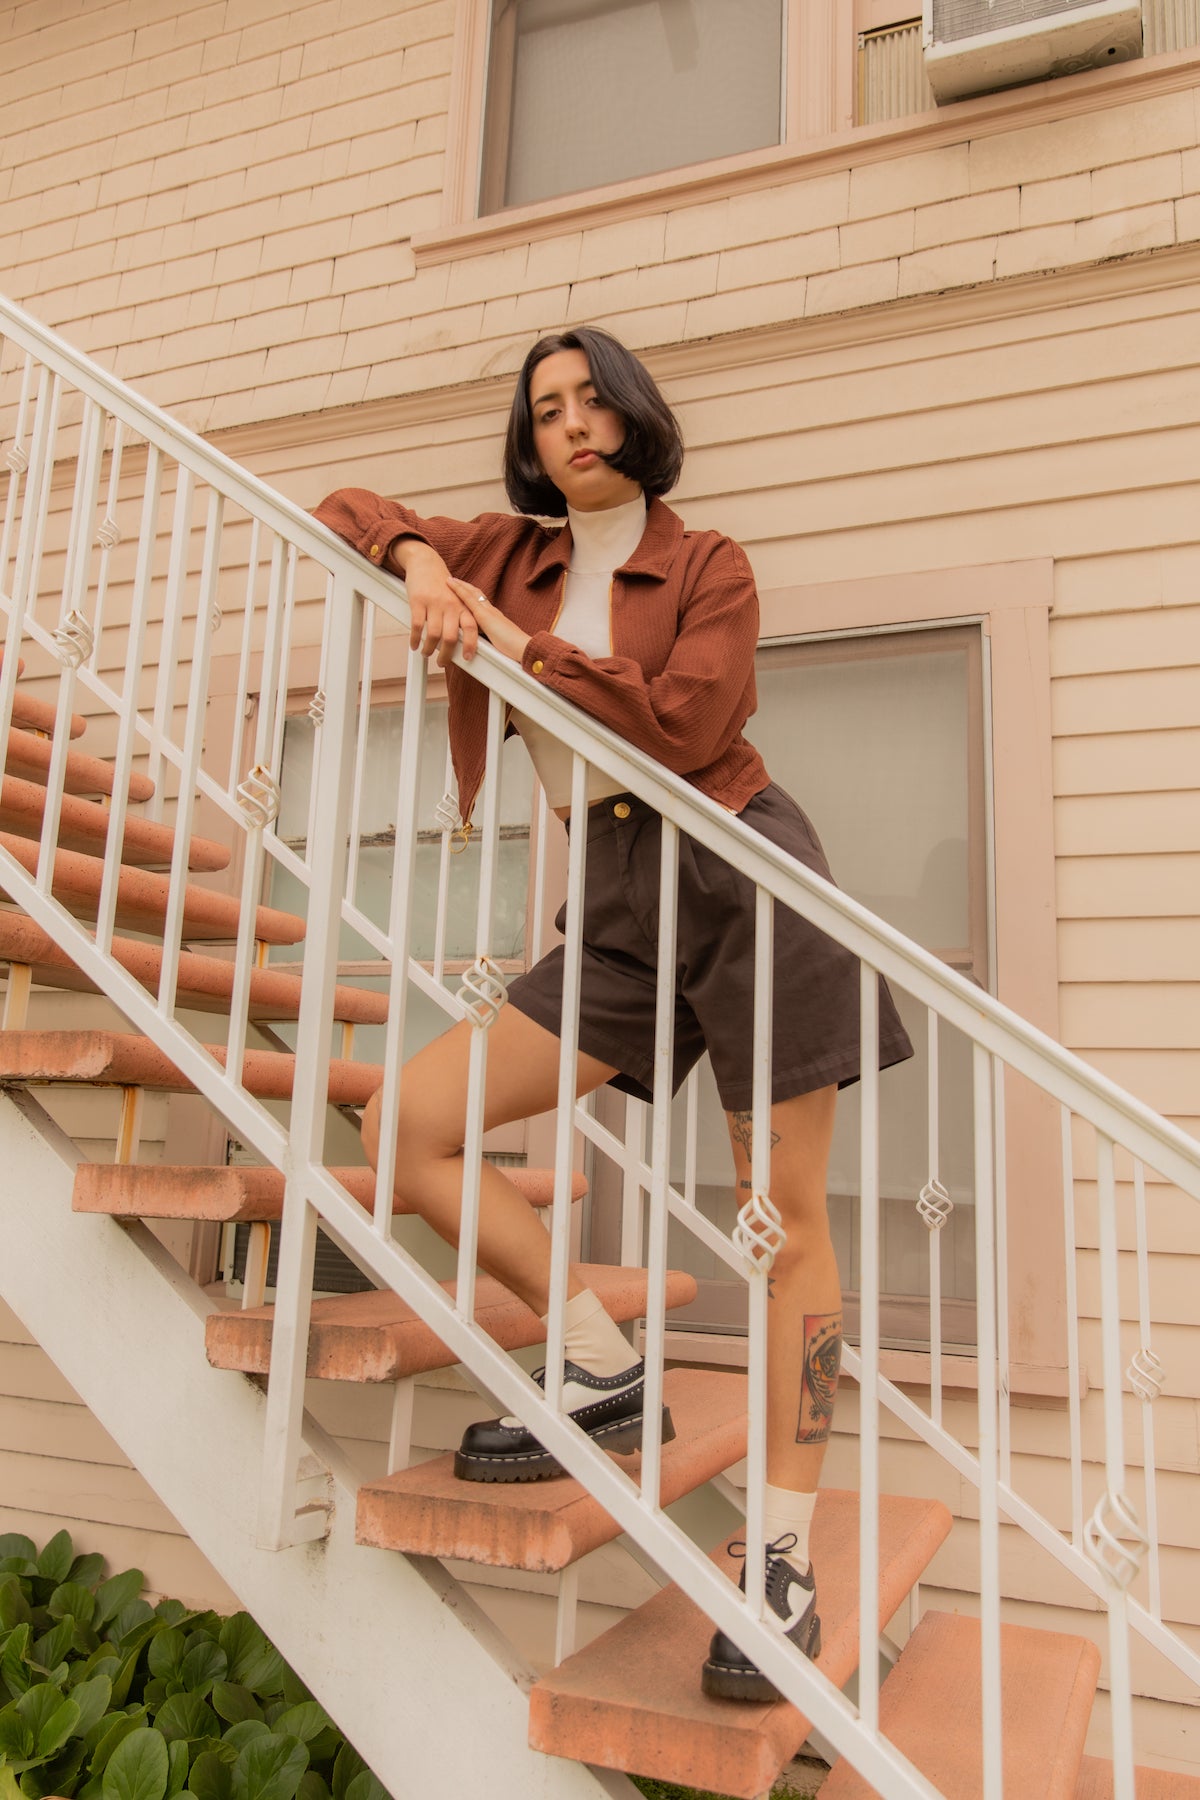 Betty is wearing Ricky Jacket in Fudgesicle Brown, Sleeveless Essential Turtleneck in Vintage Off-White, and Trouser Shorts in Espresso Brown